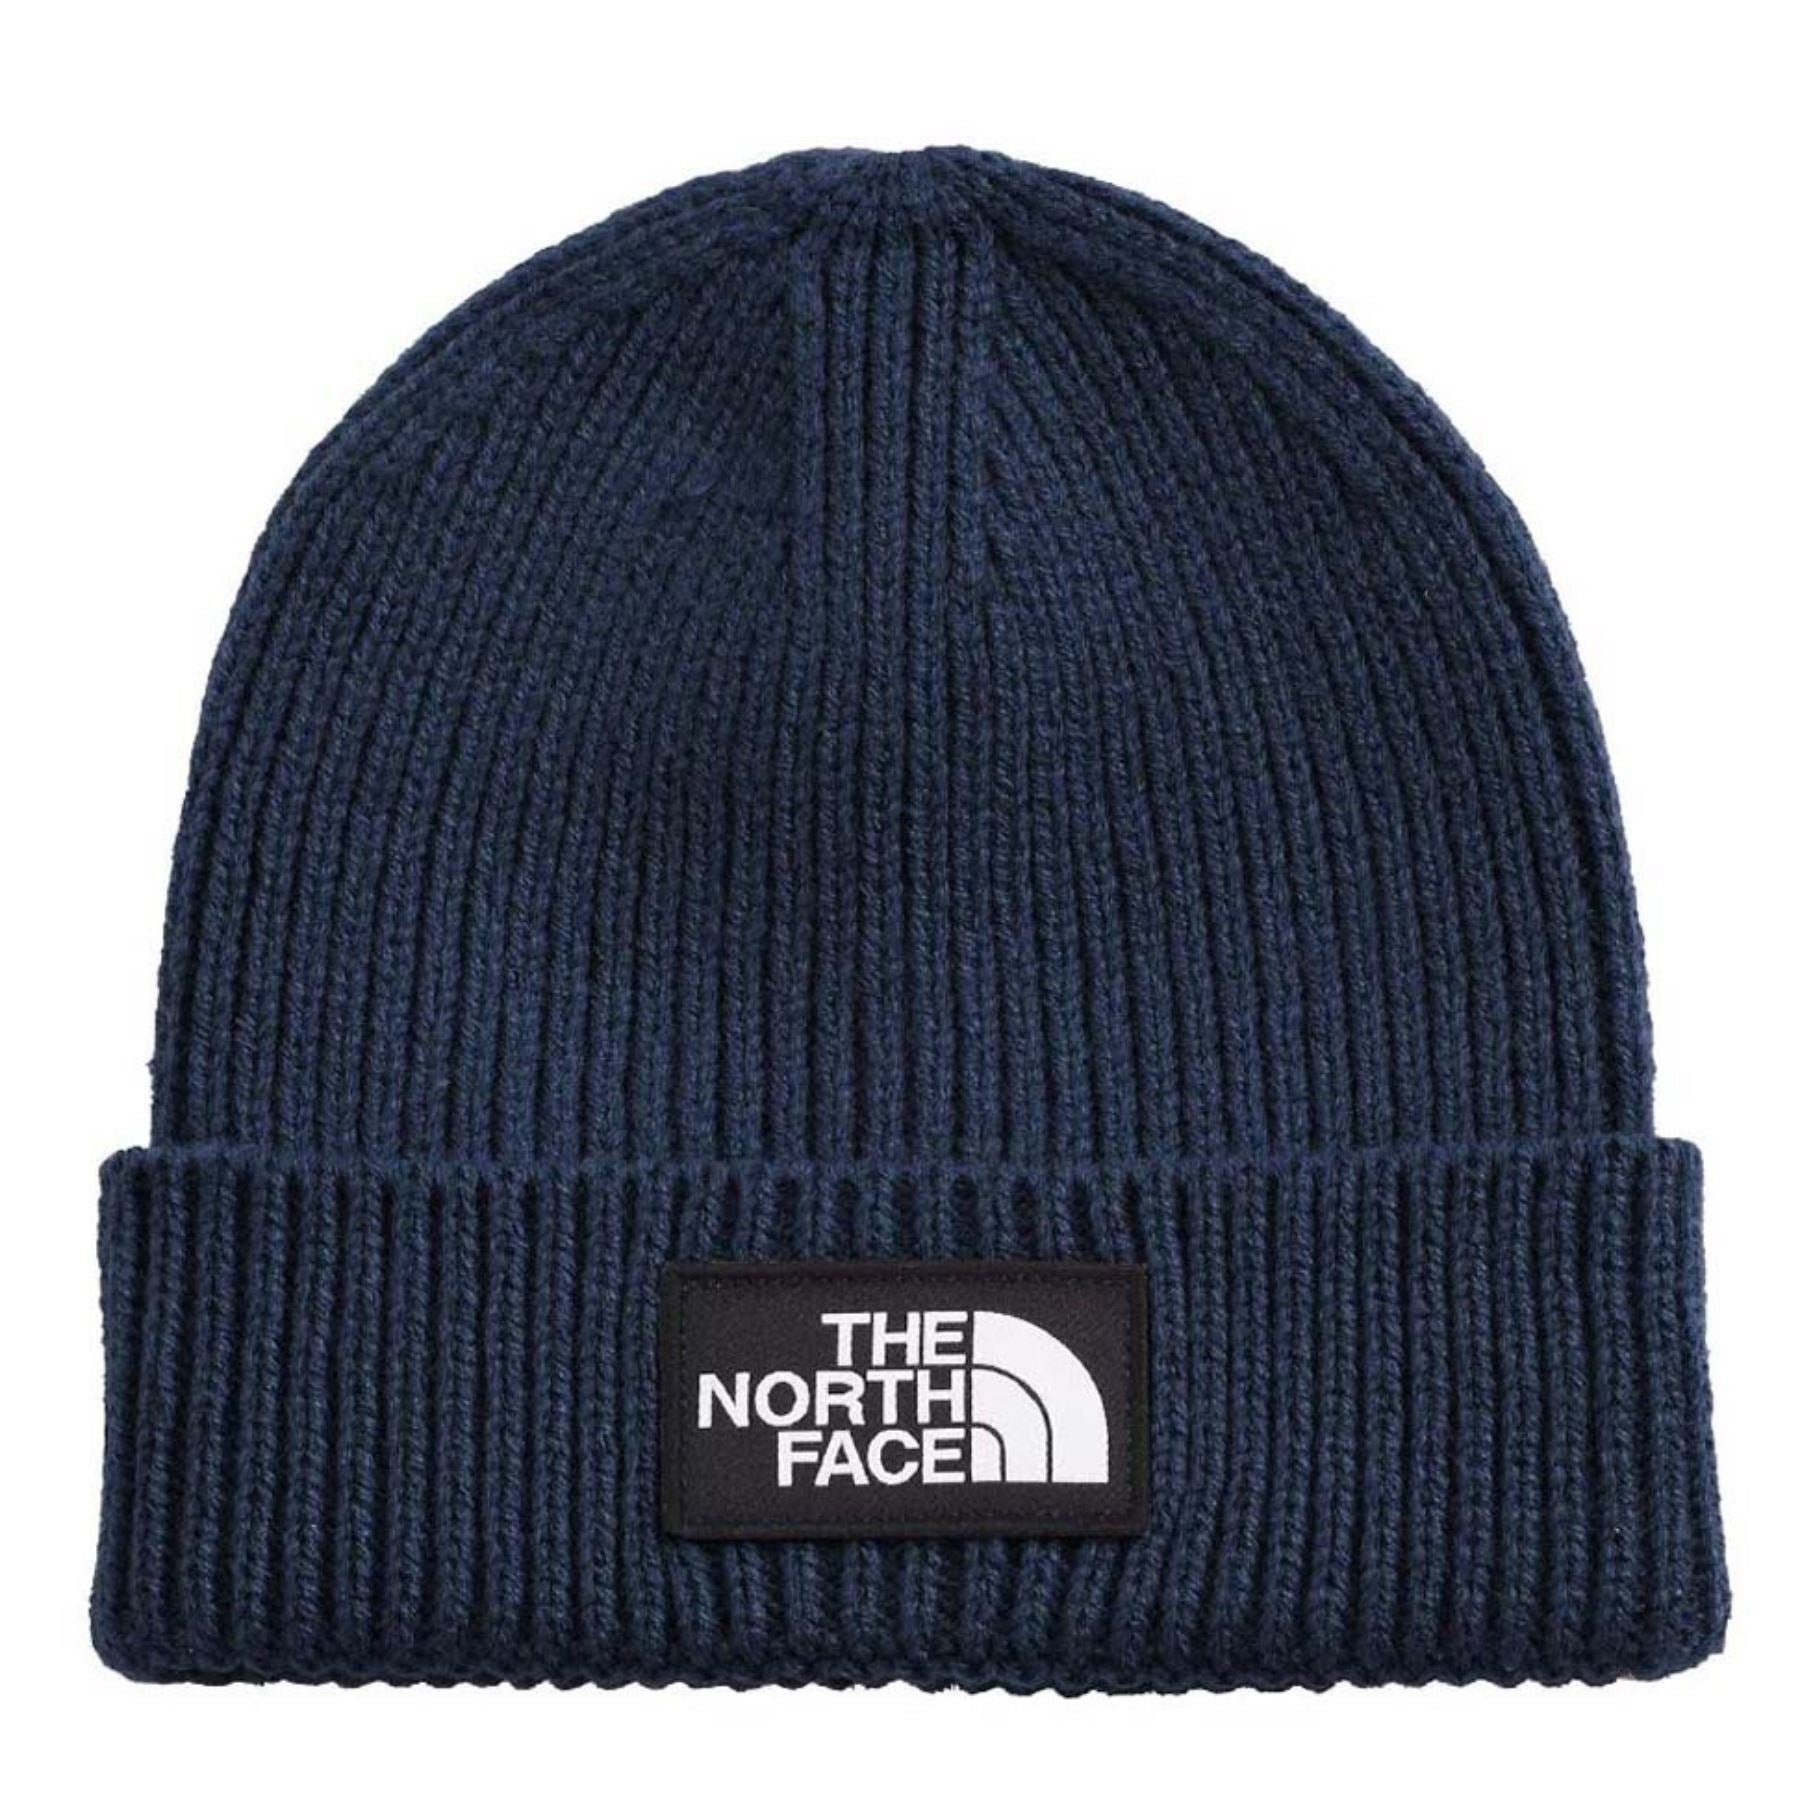 The North Face Logo Box Cuff Beanie (Small) - Summit Navy Beanies The North Face 